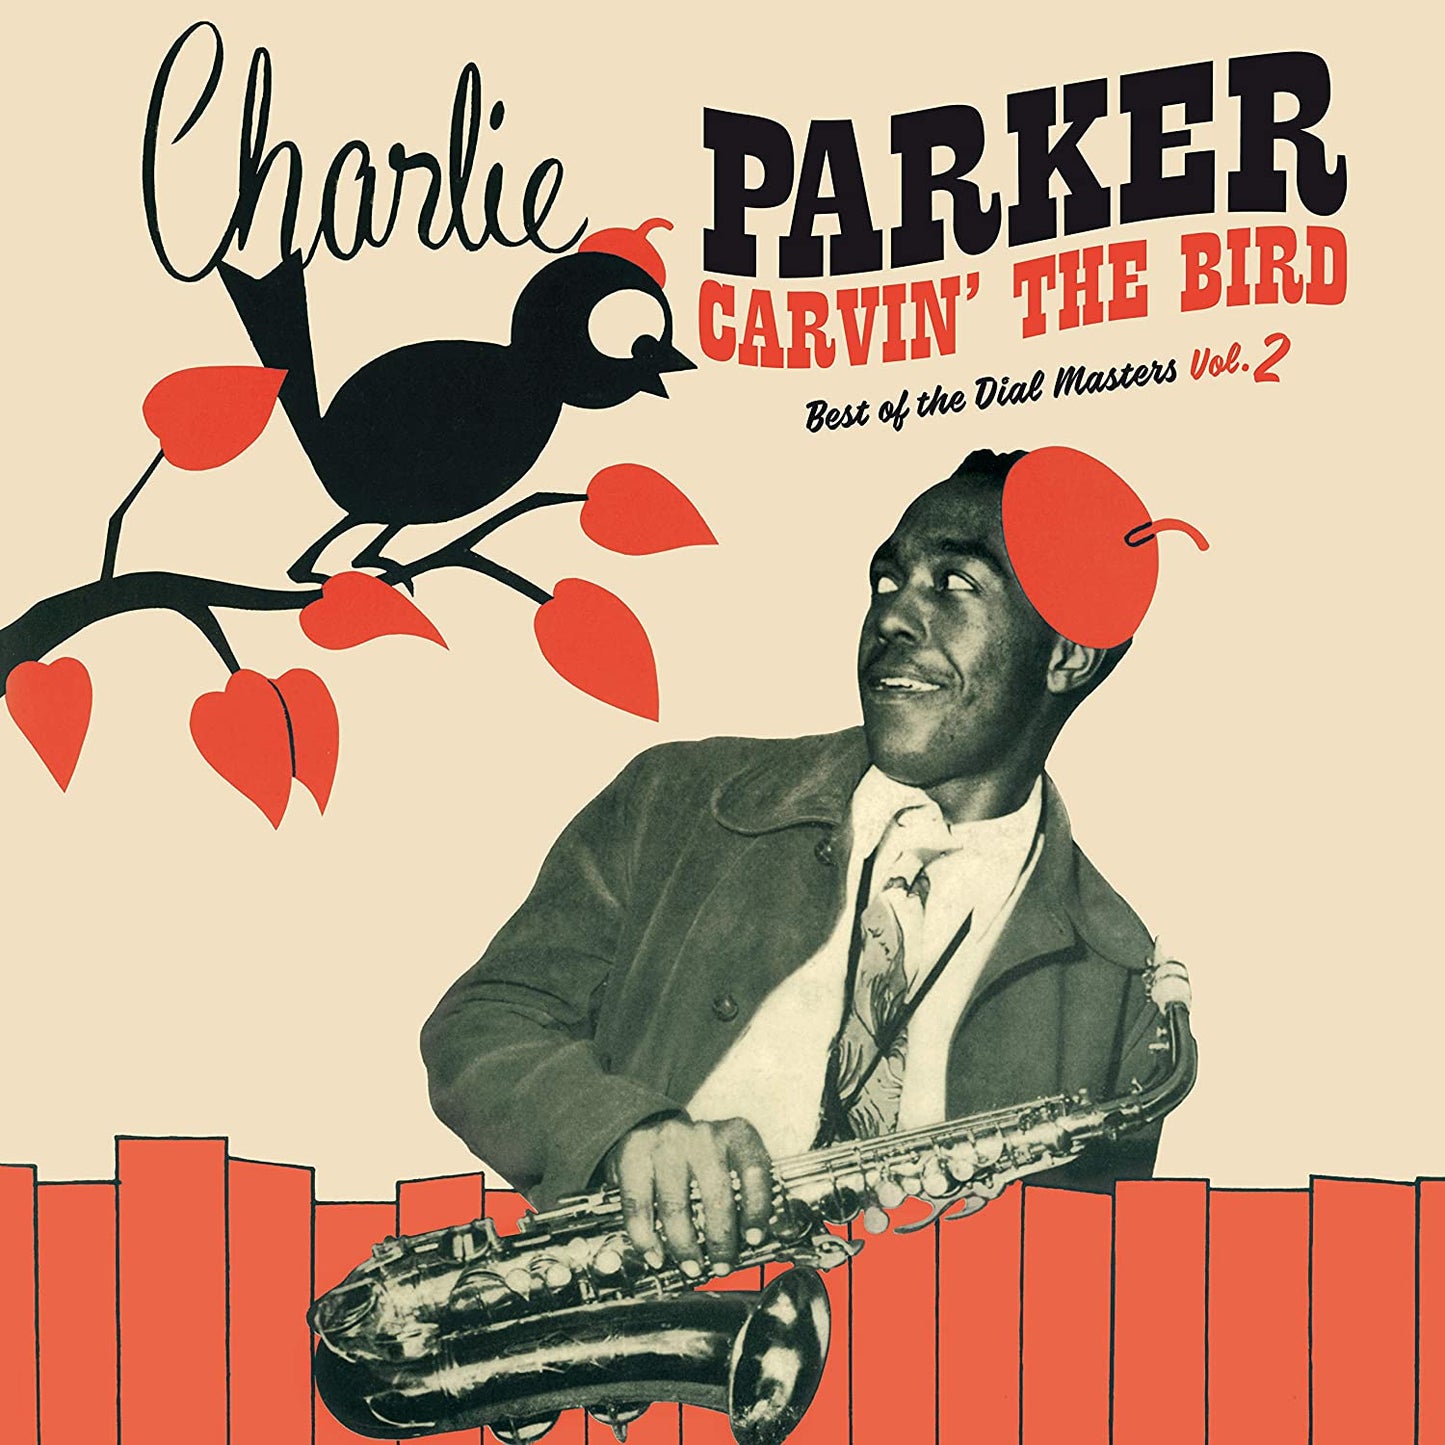 Charlie Parker - Carvin The Bird: Best Of The Dial Masters